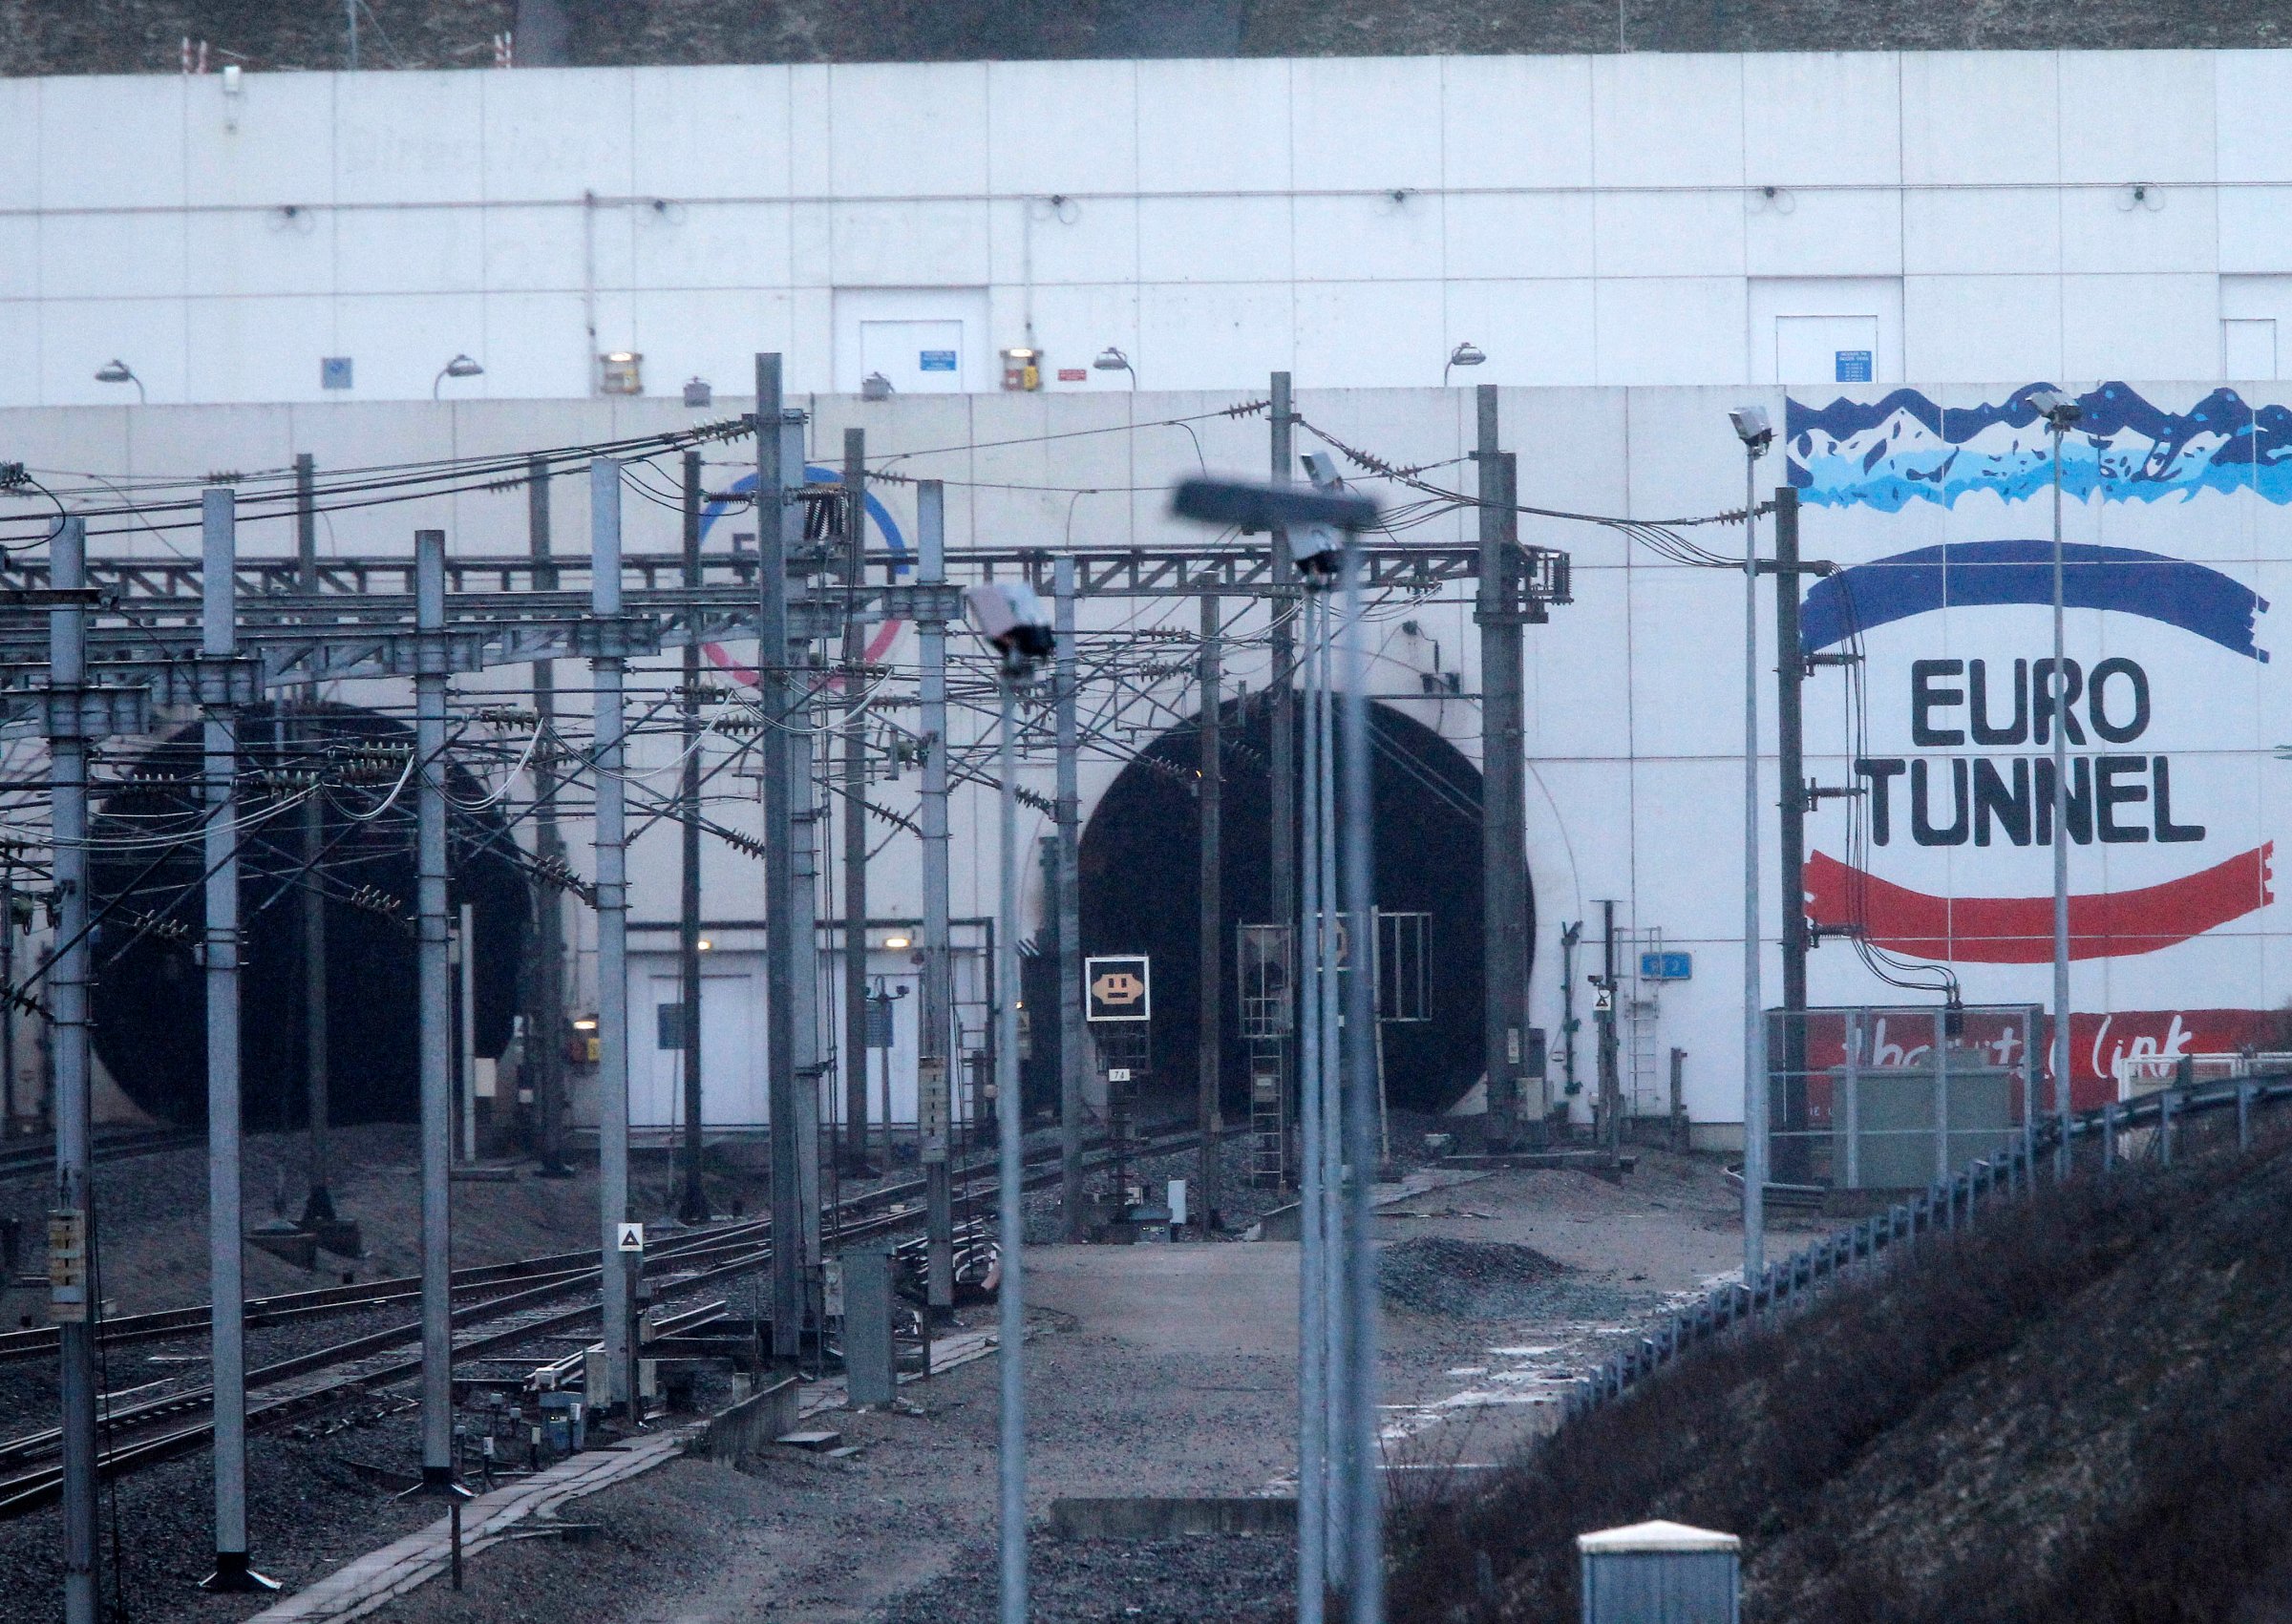 The entrance to the Channel Tunnel near Calais. in Coquelles on Jan.17, 2015.